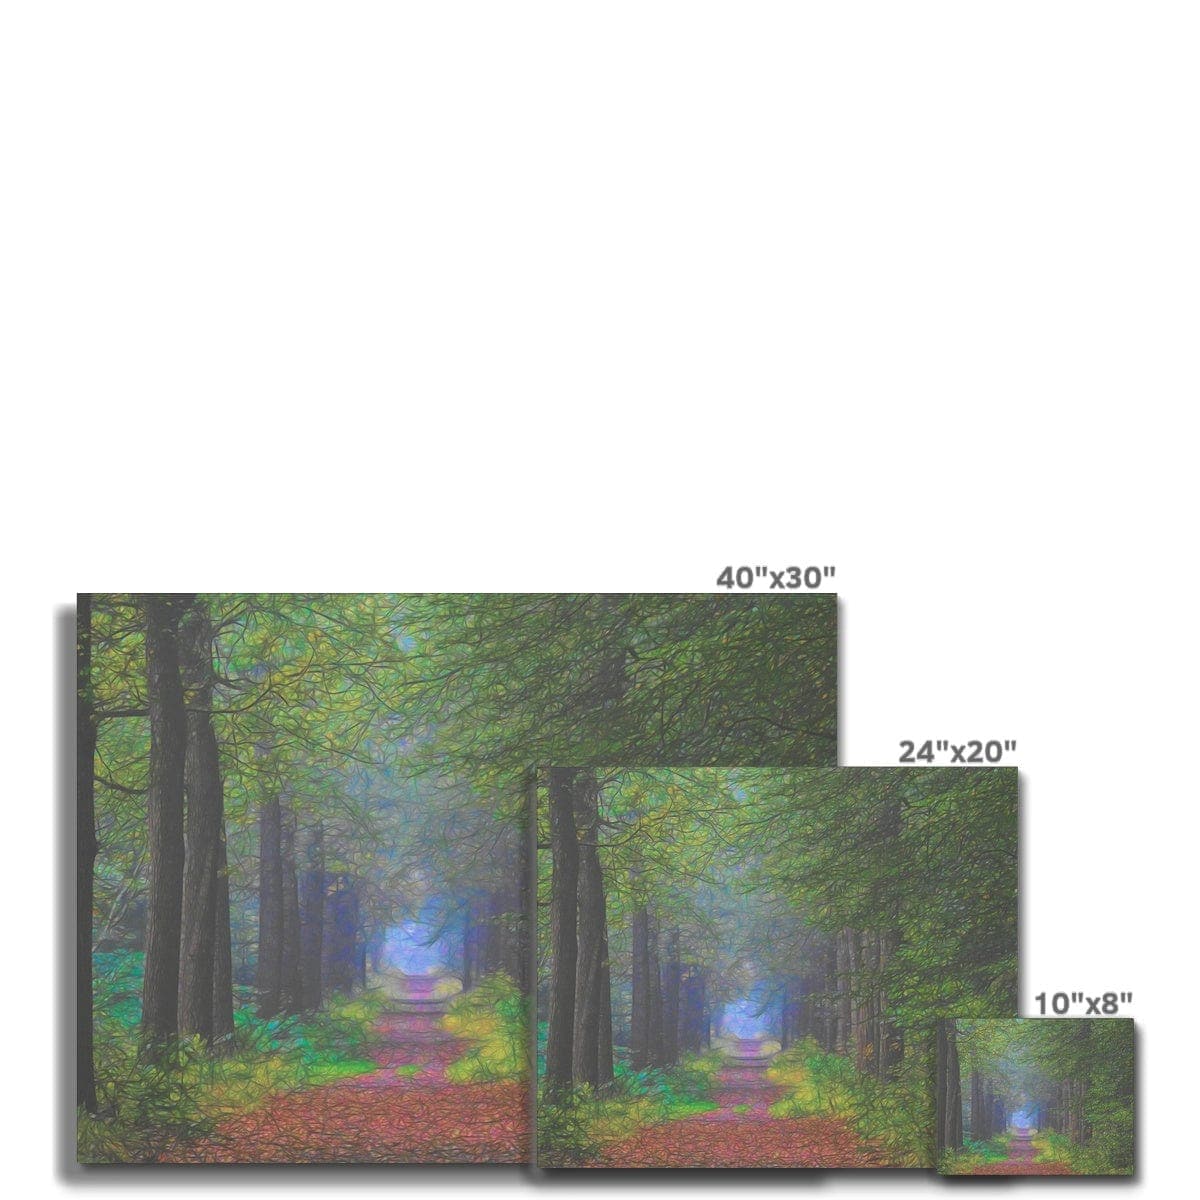 Forest lane, digital art on Canvas, by Mother nature photography